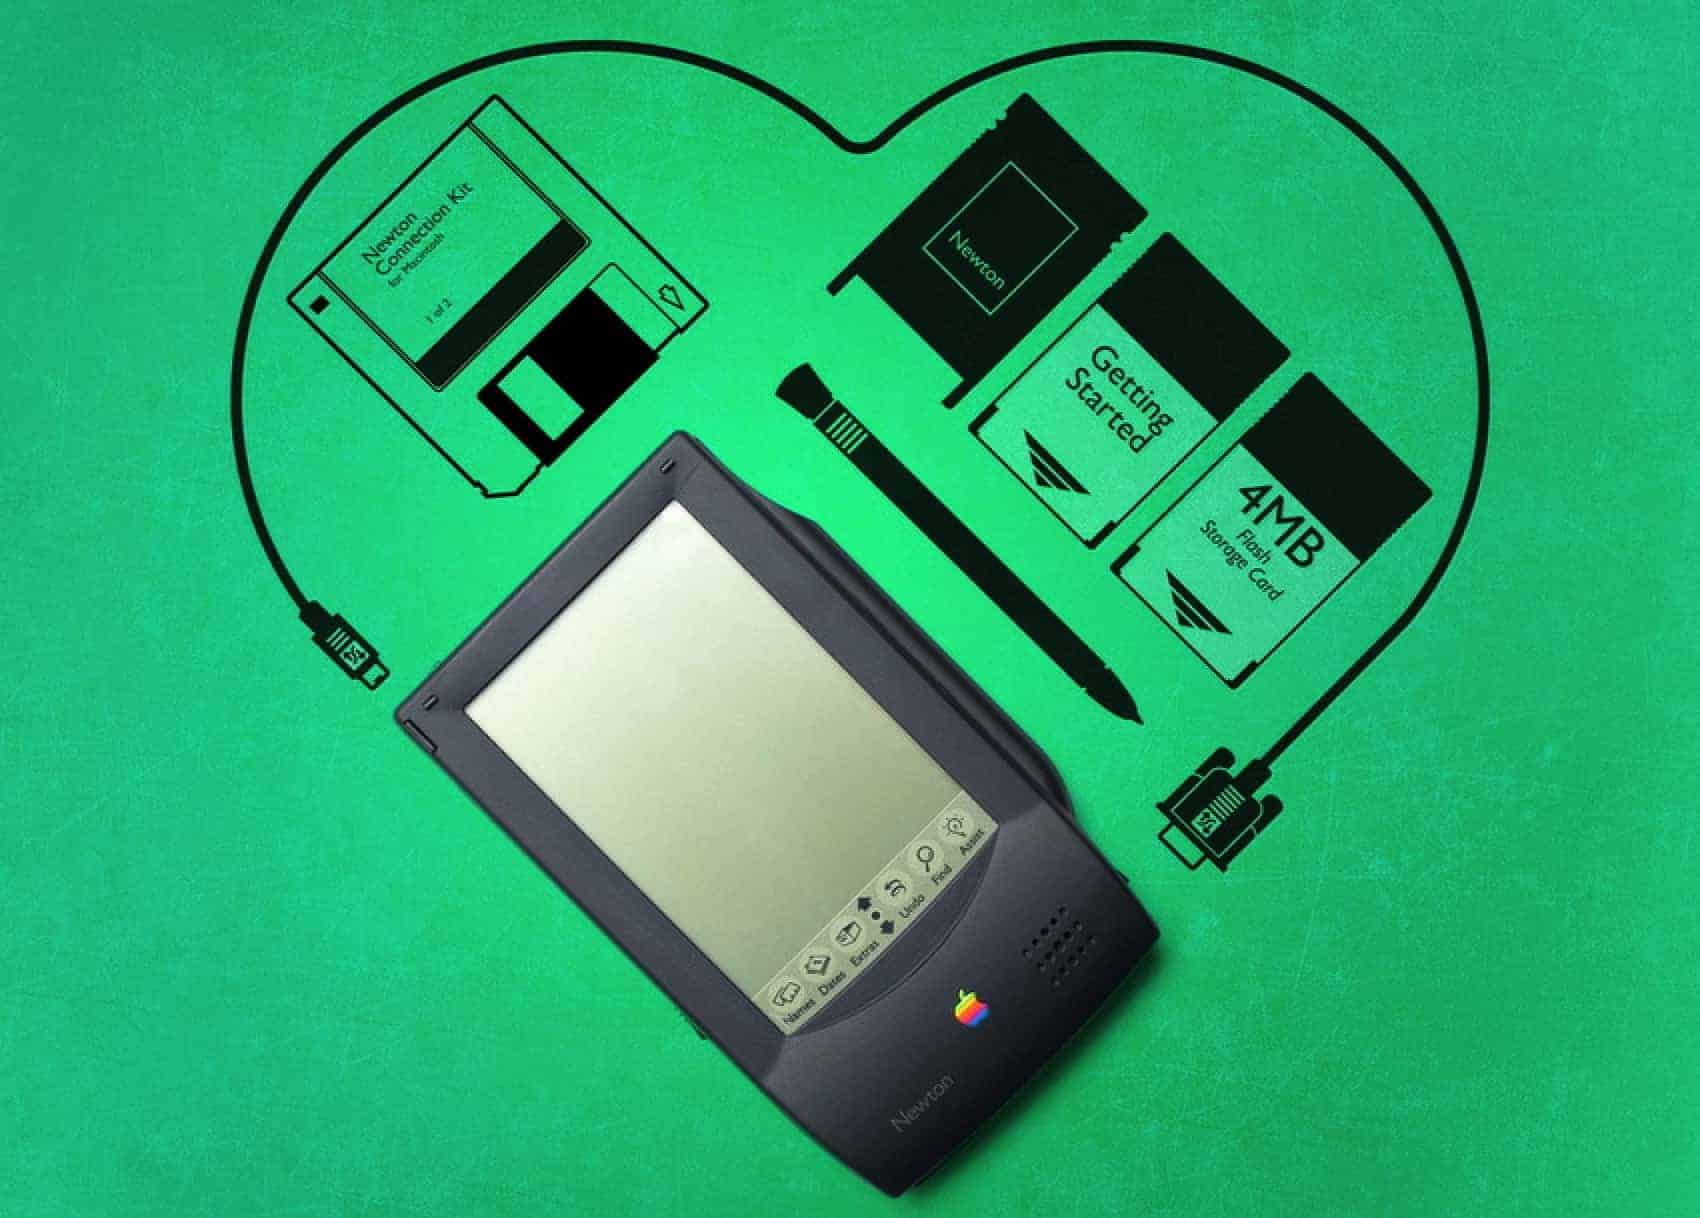 Love Notes to Newton traces the history of a device ahead of its time.